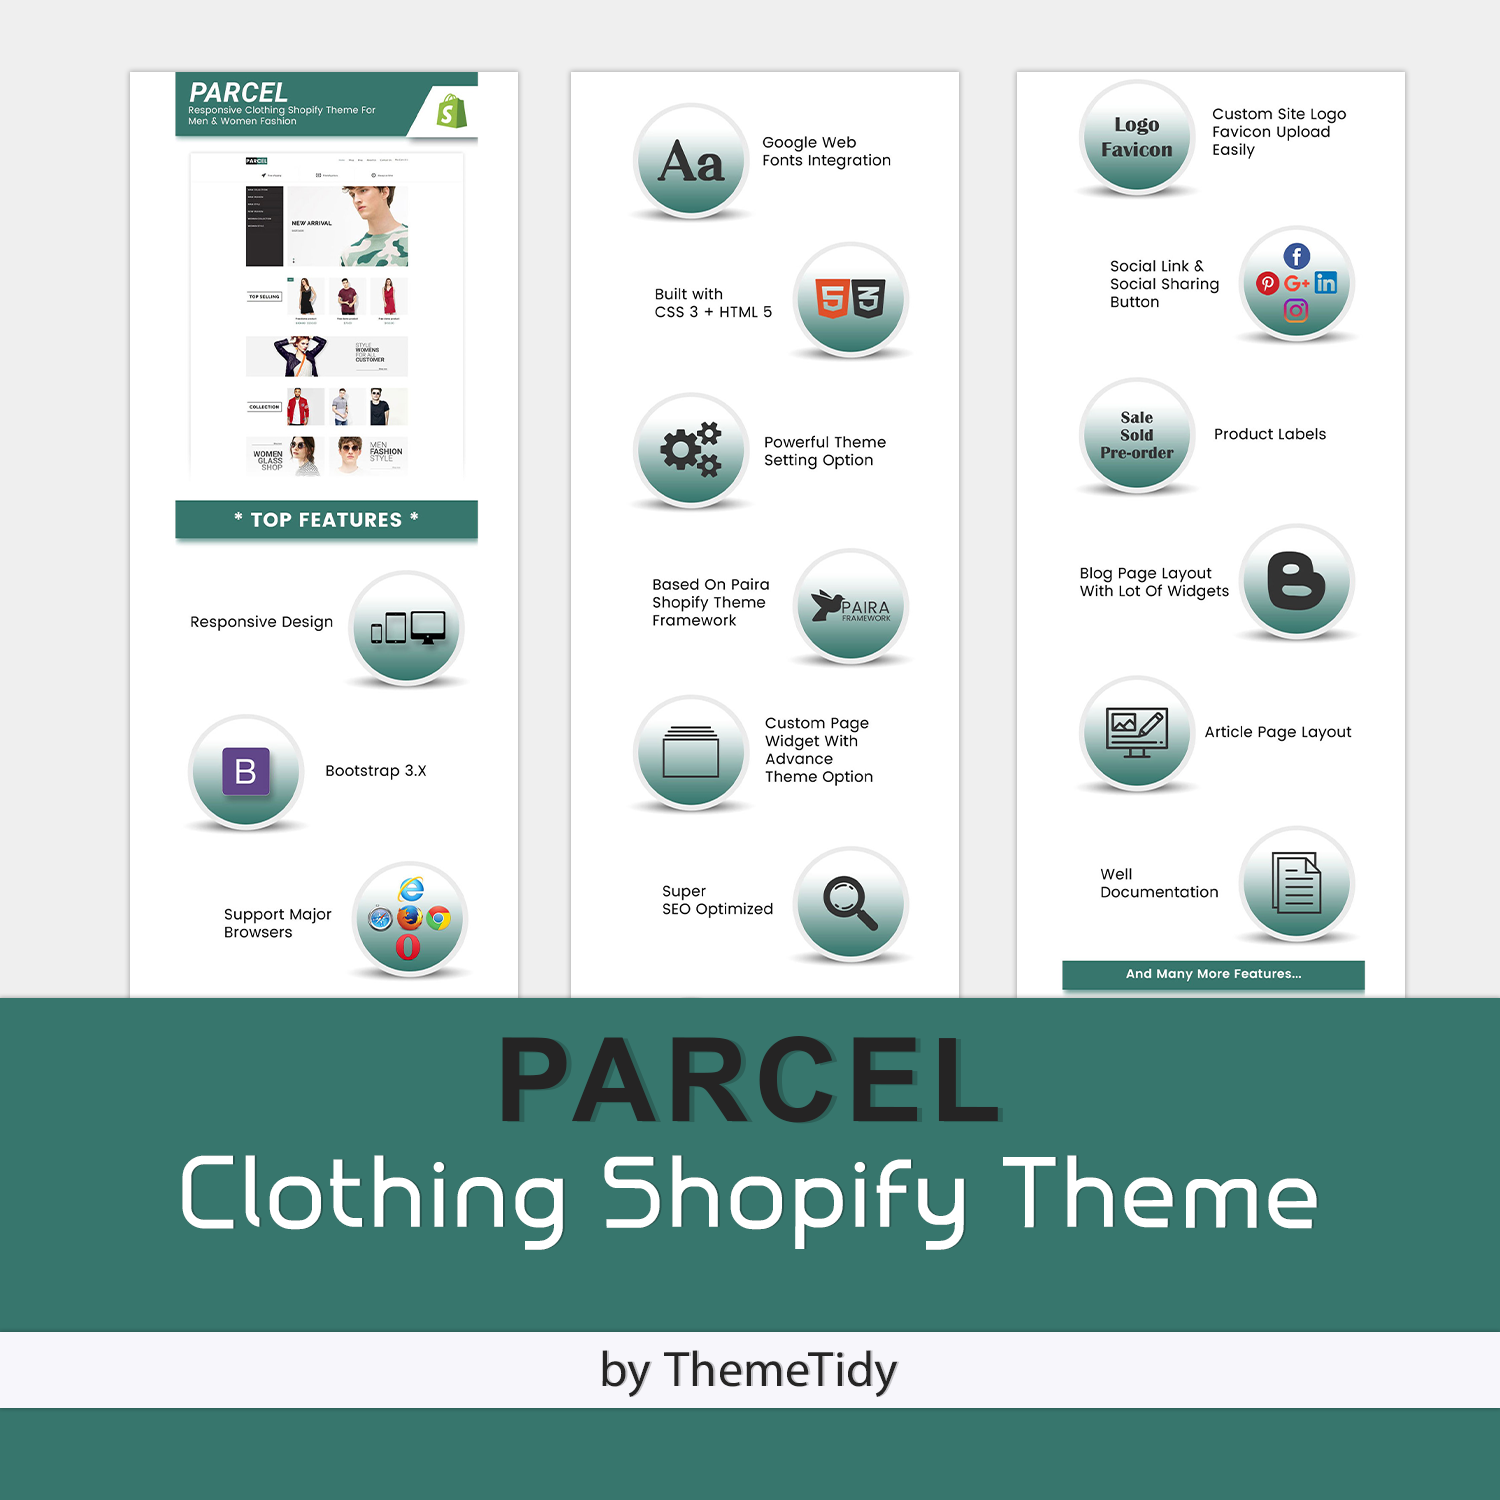 Preview parcel clothing shopify theme.